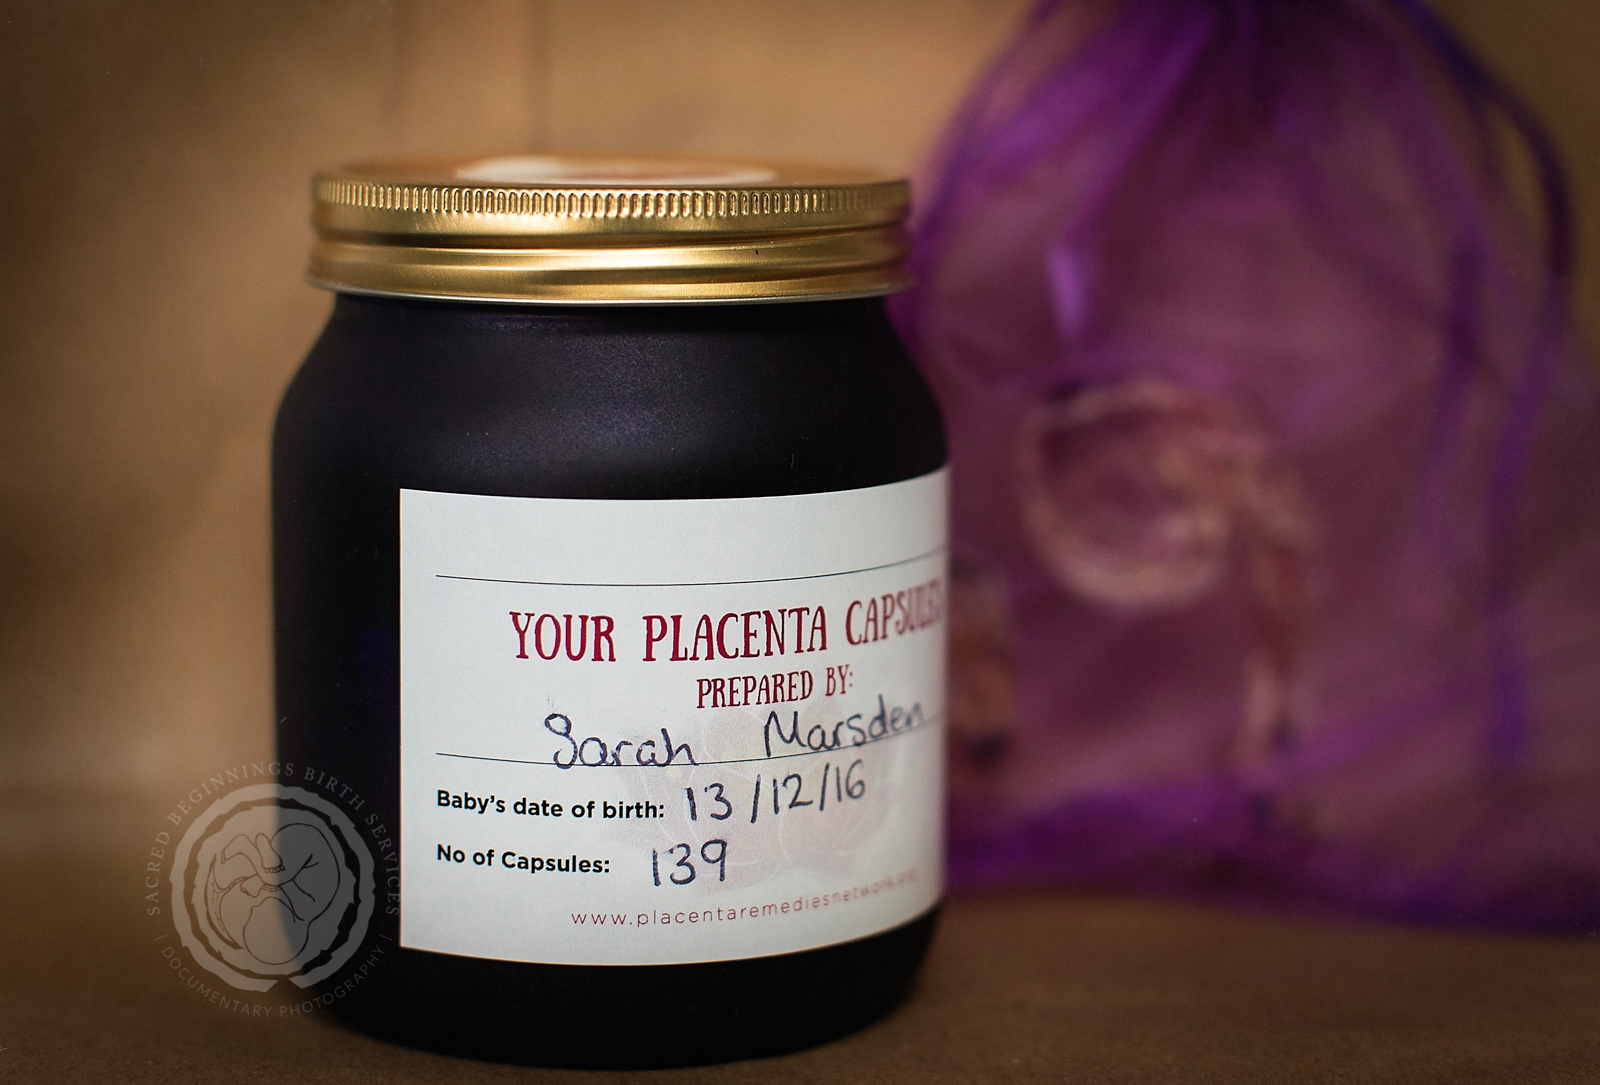 Along with doula services, photographer Sarah Marsden of Sacred Beginnings Birth Services also offers postpartum placenta remedies.